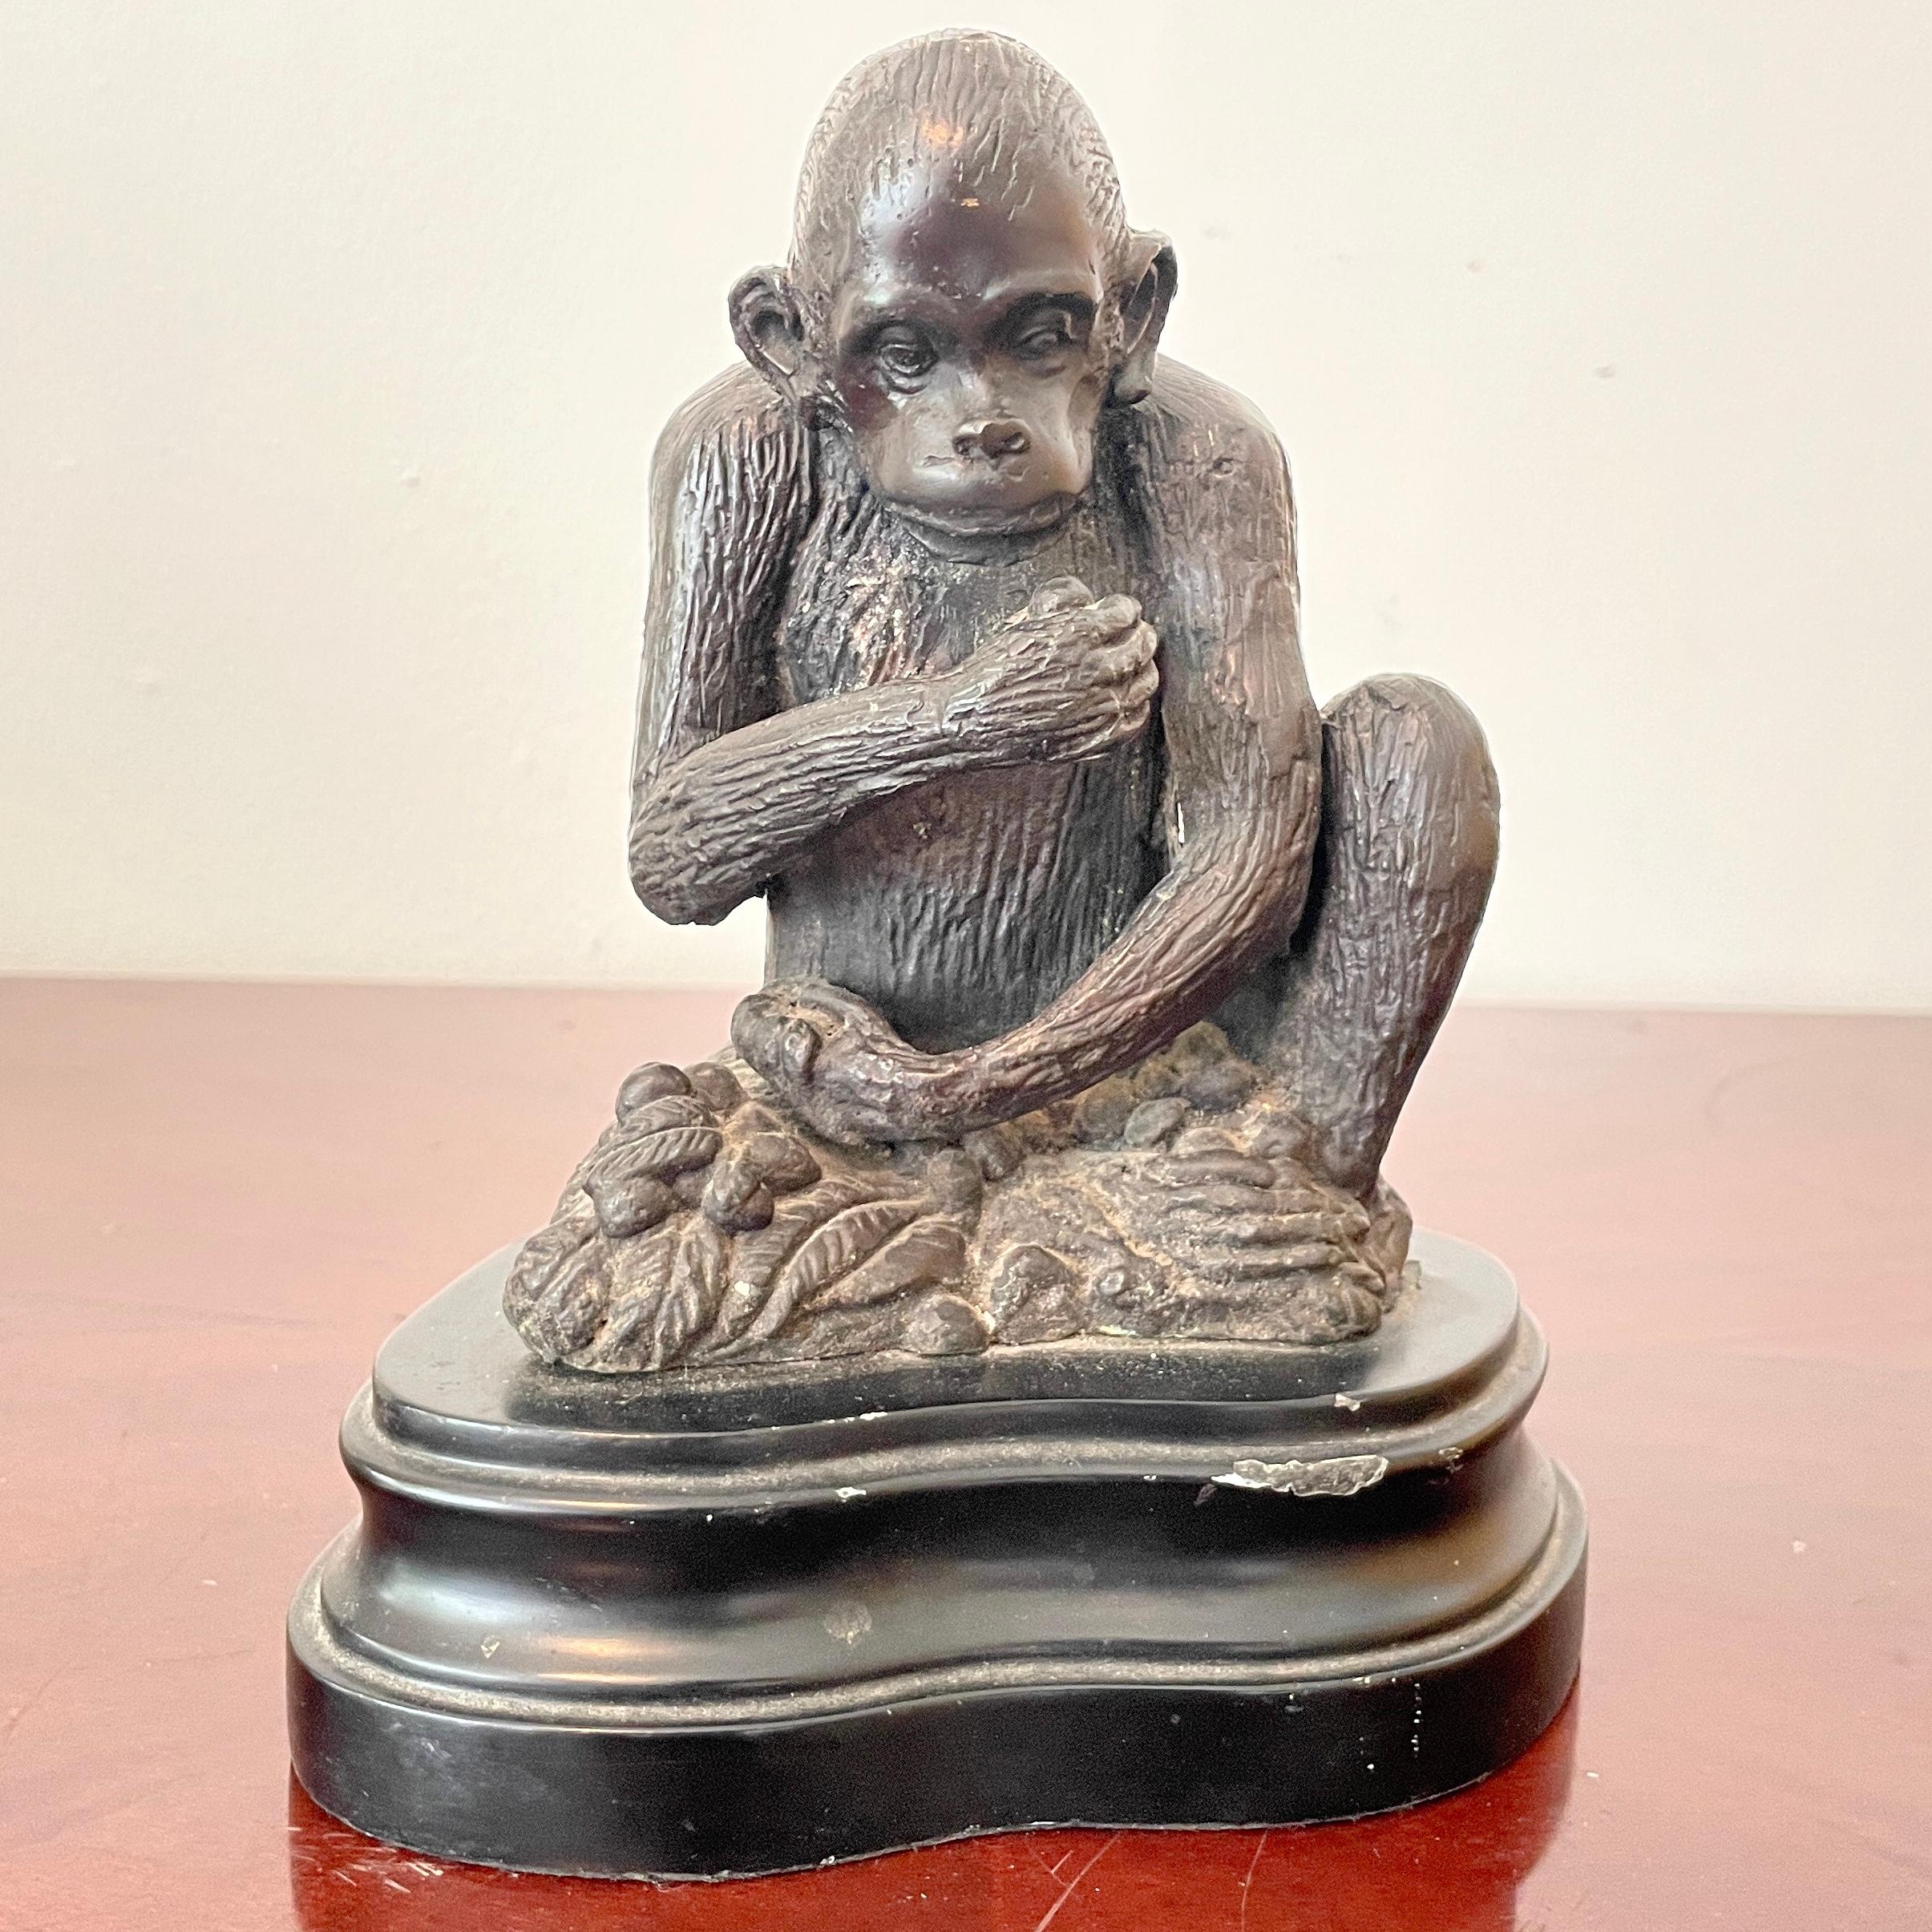 Beautiful miniature bronze statue of a monkey sitting on a base. Great addition to your table tops and interiors.